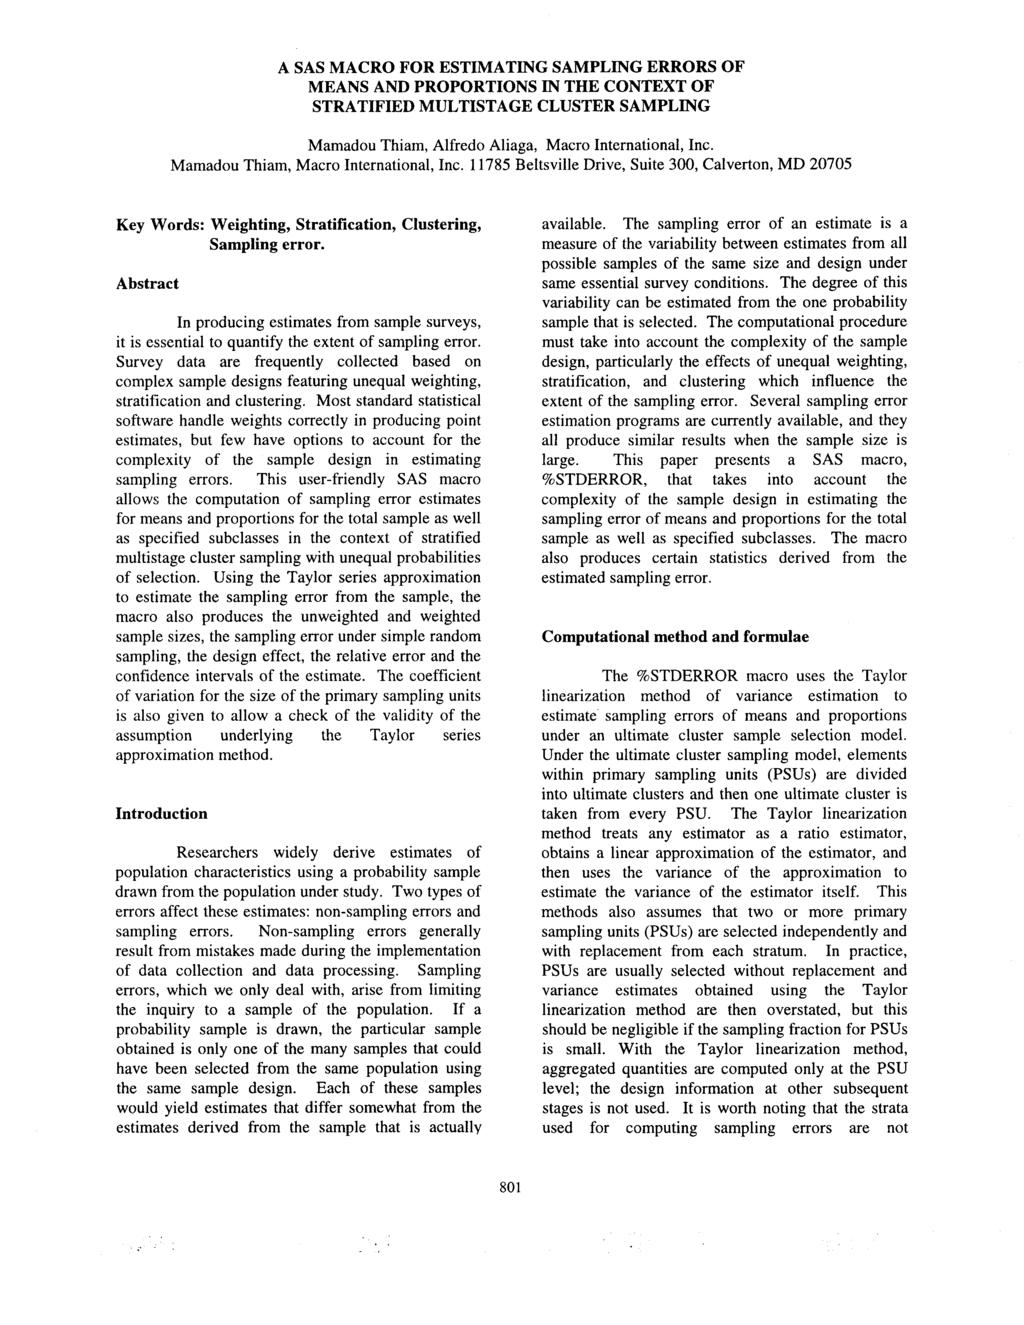 A SAS MACRO FOR ESTIMATING SAMPLING ERRORS OF MEANS AND PROPORTIONS IN THE CONTEXT OF STRATIFIED MULTISTAGE CLUSTER SAMPLING Mamadou Thiam, Alfredo Aliaga, Macro International, Inc.